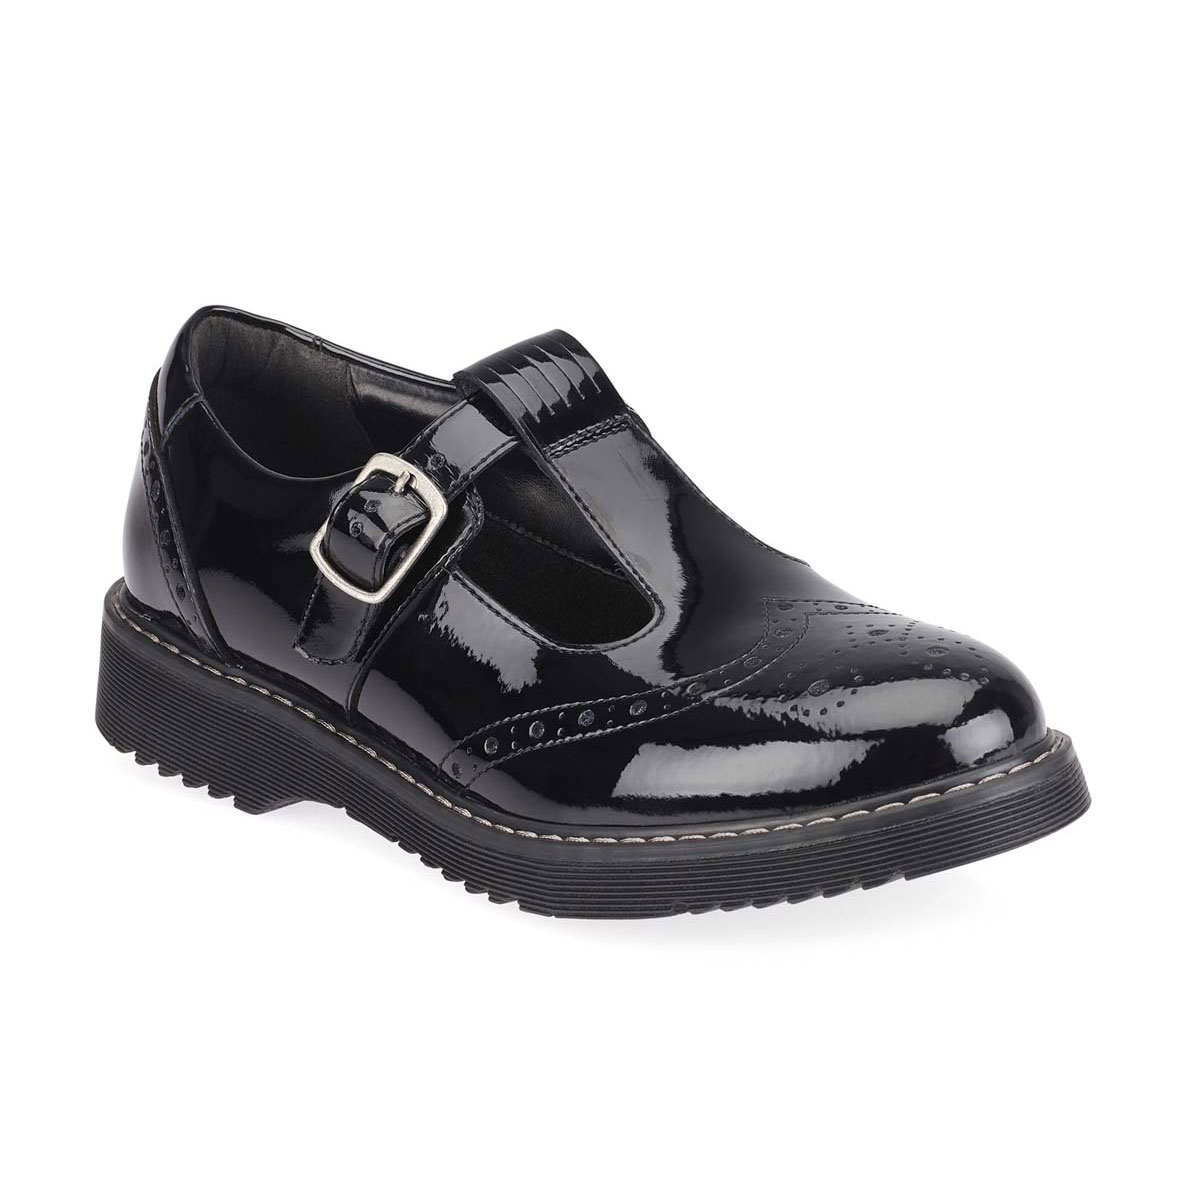 Start Rite - F Imagine T Bar In Black Patent 3510-3 In Size 38 In Plain Black Patent For School Girls Shoes  In Black Patent For kids